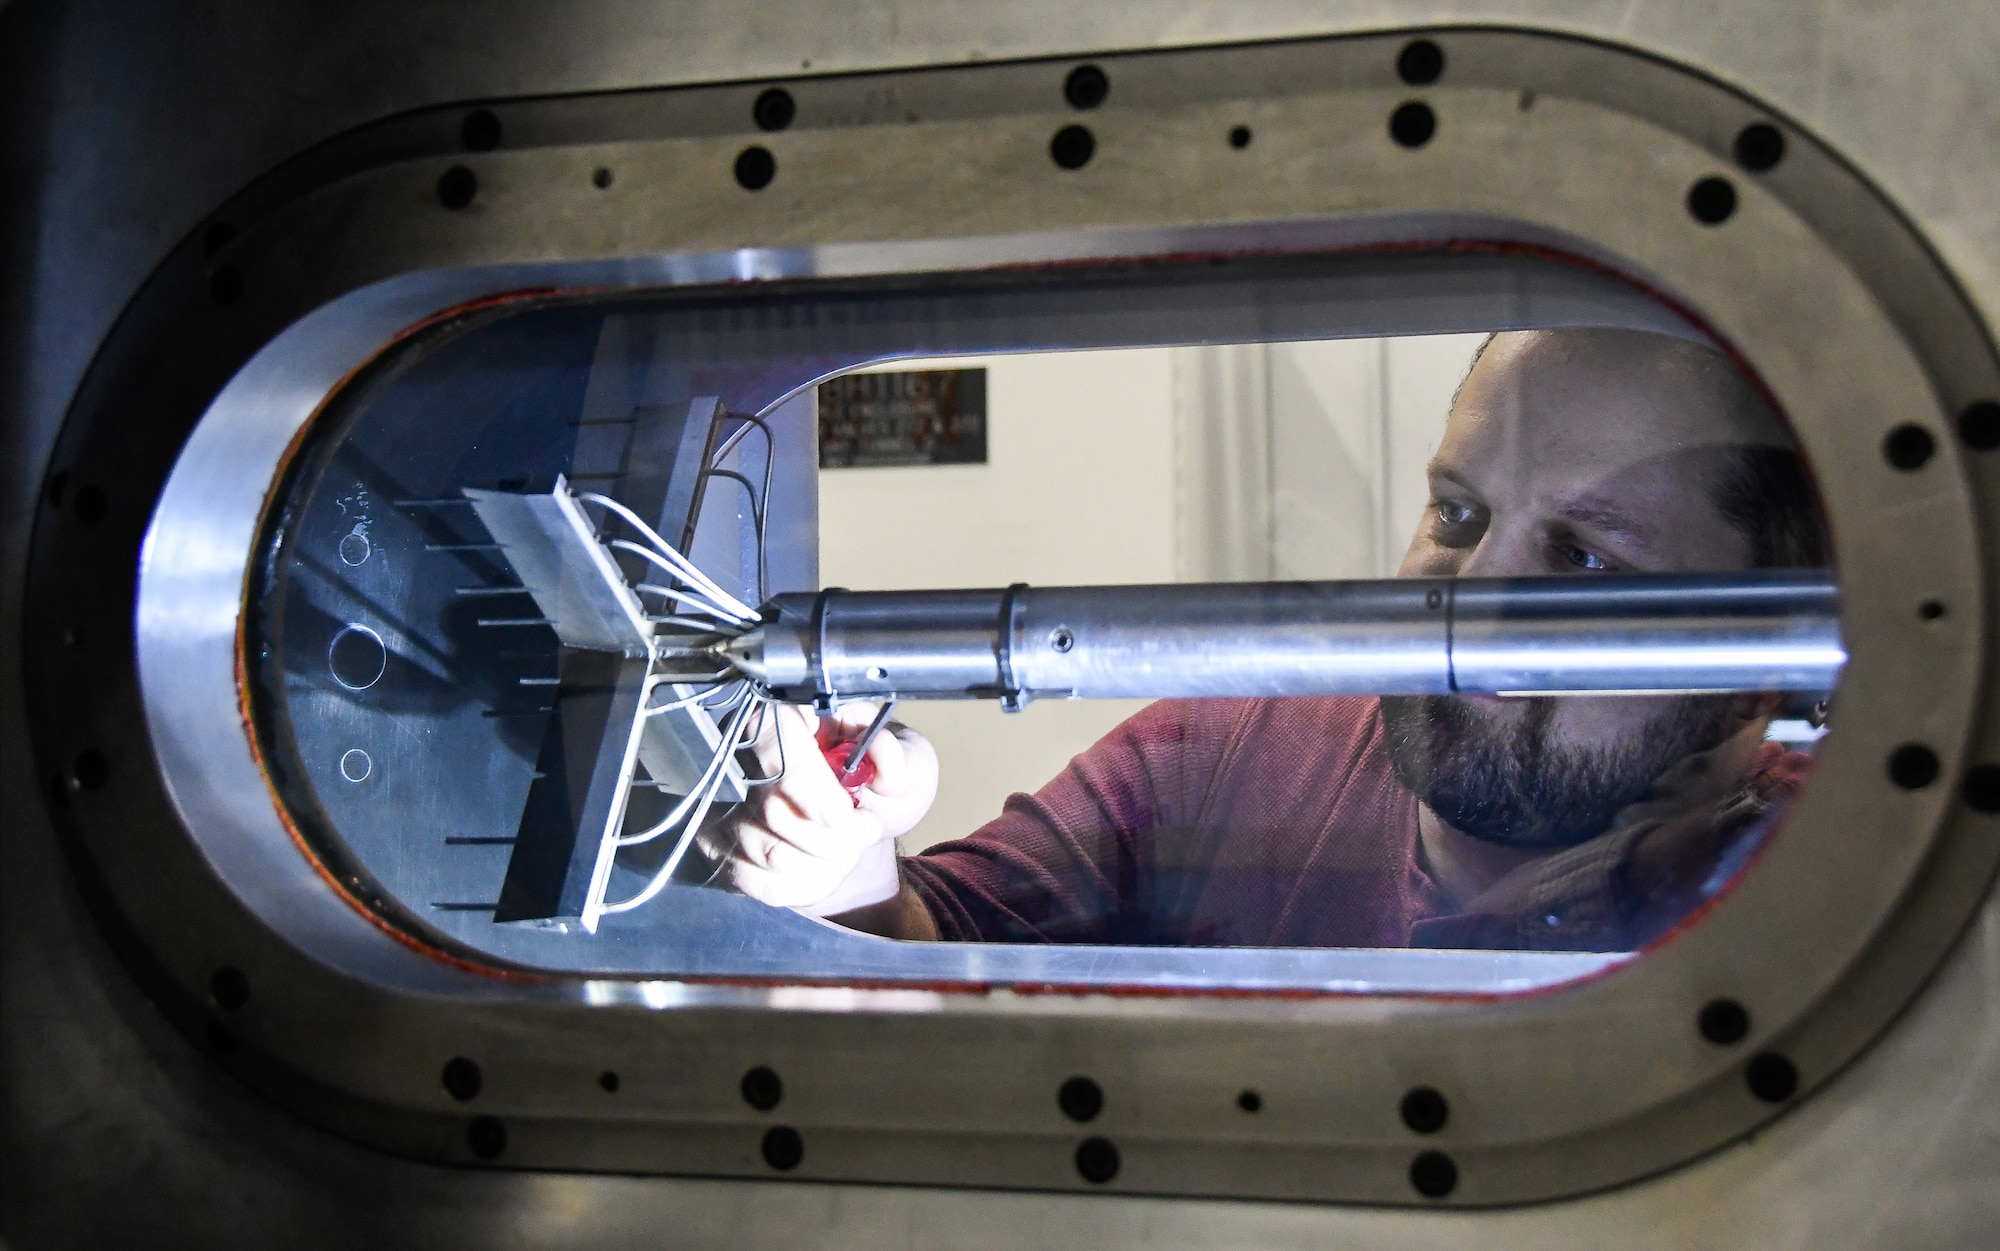 Dr. Jerrod Hofferth, von Kármán Gas Dynamics Facility Wind Tunnel D lead engineer, works on a freestream characterization rake, used to determine Mach Number Uniformity, positioned in the Tunnel D test cell June 5 at Arnold Air Force Base. The tunnel was reactivated earlier this year and is operated by the Air Force Research Laboratory High Speed Experimentation Branch. (U.S. Air Force photo by Jill Pickett)